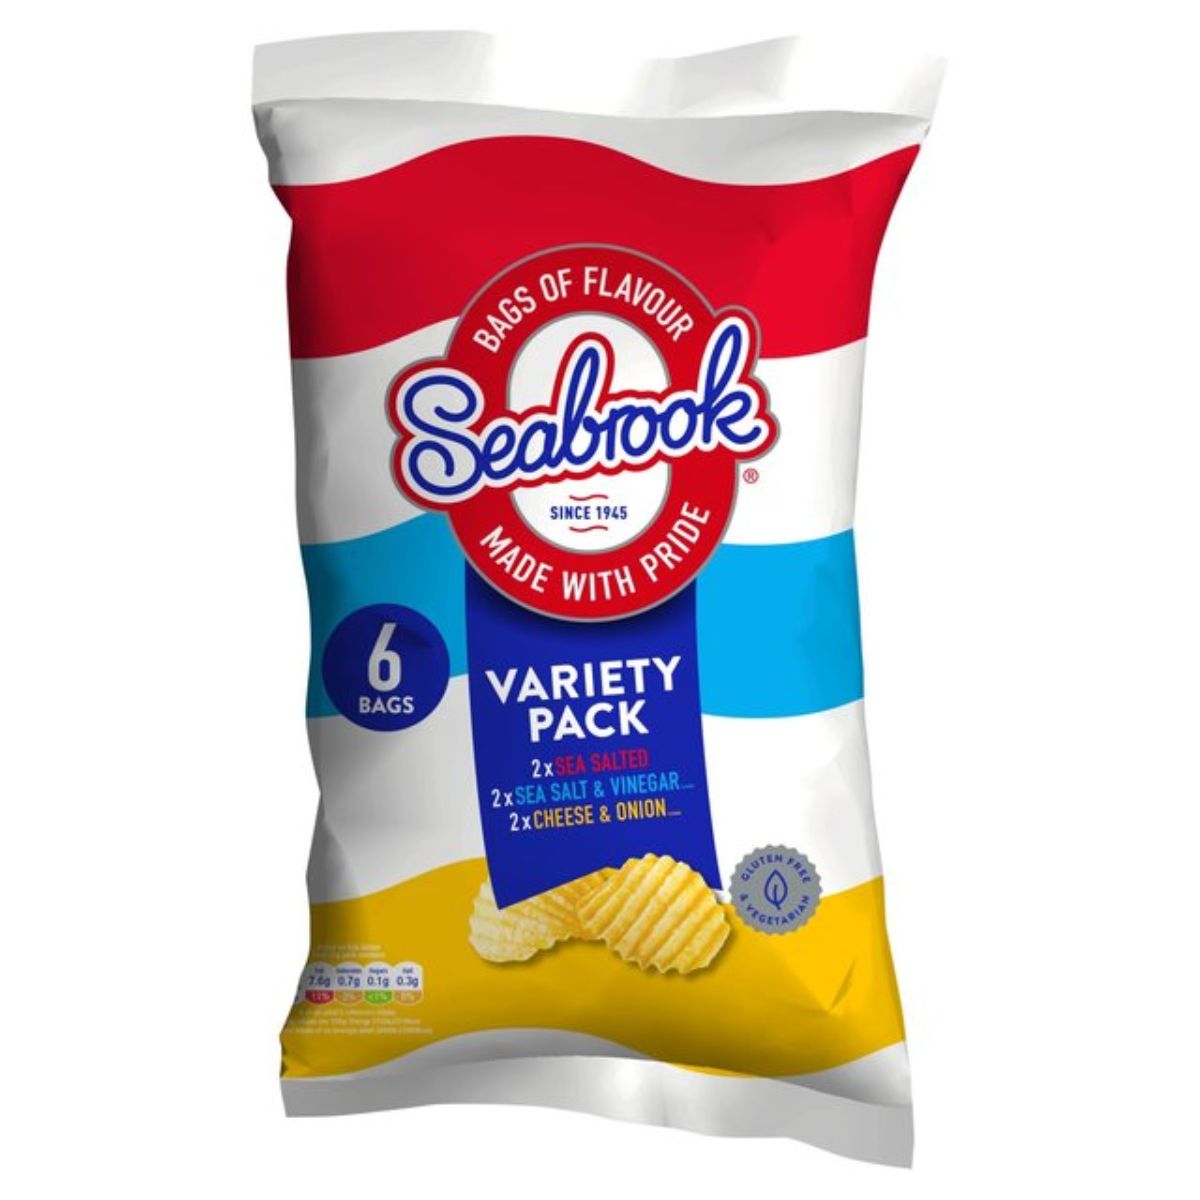 A bag of Seabrook - Variety Crisps - 5 Pack on a white background.